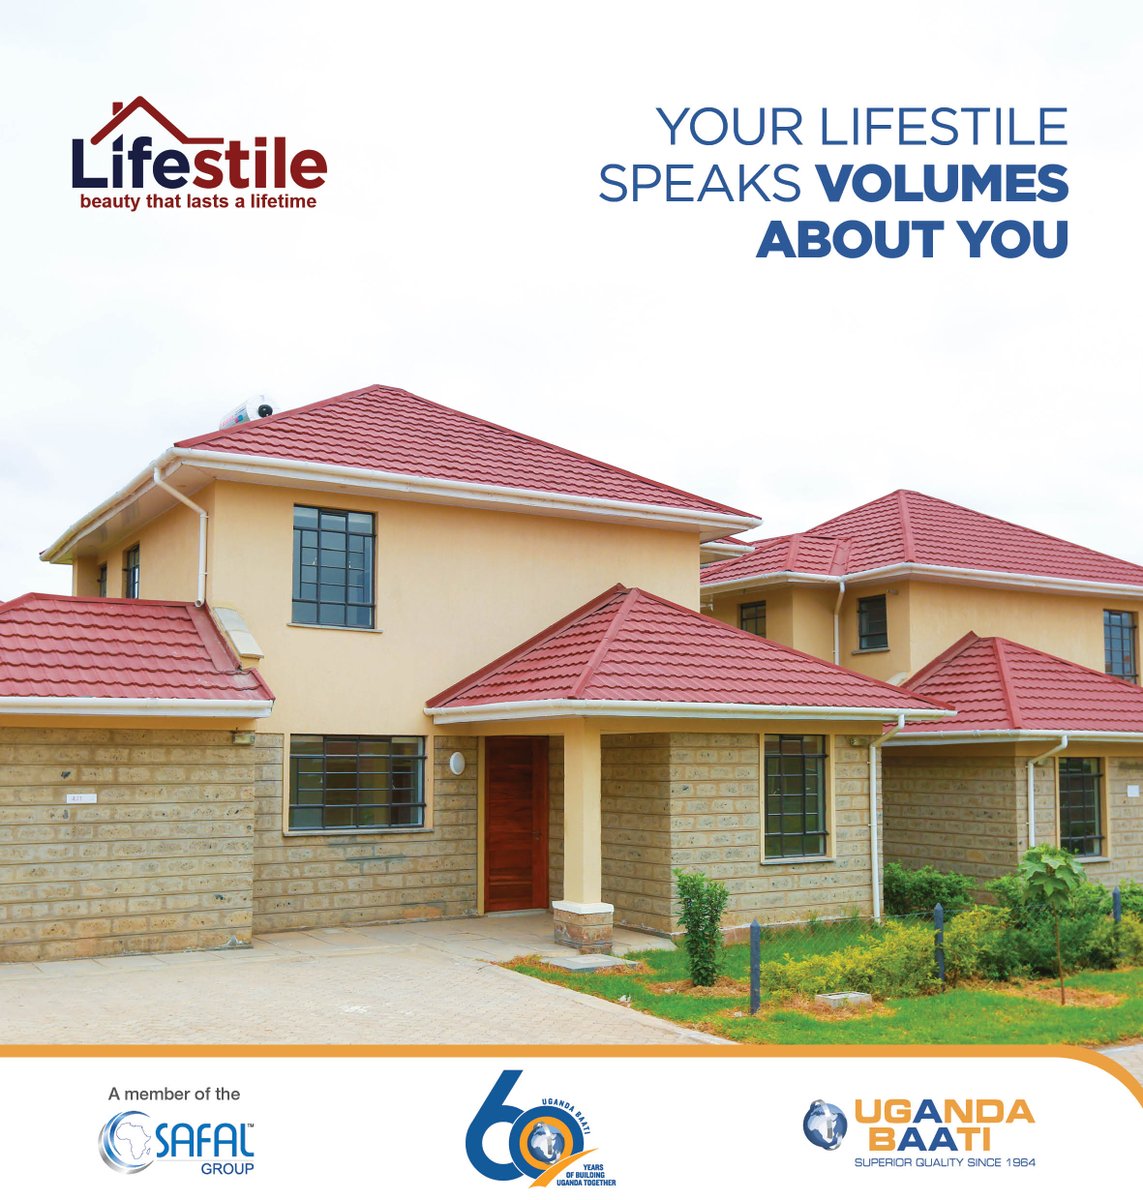 Your home can be the benchmark for the rest of your neighbourhood. Be the muggaga on the hill with Lifestile. You are spoilt for colour choice when it comes to Lifestile. Get it in steel grey, forest green, rose garnet, midnight blue, charcoal among others. Visit the e-shop and